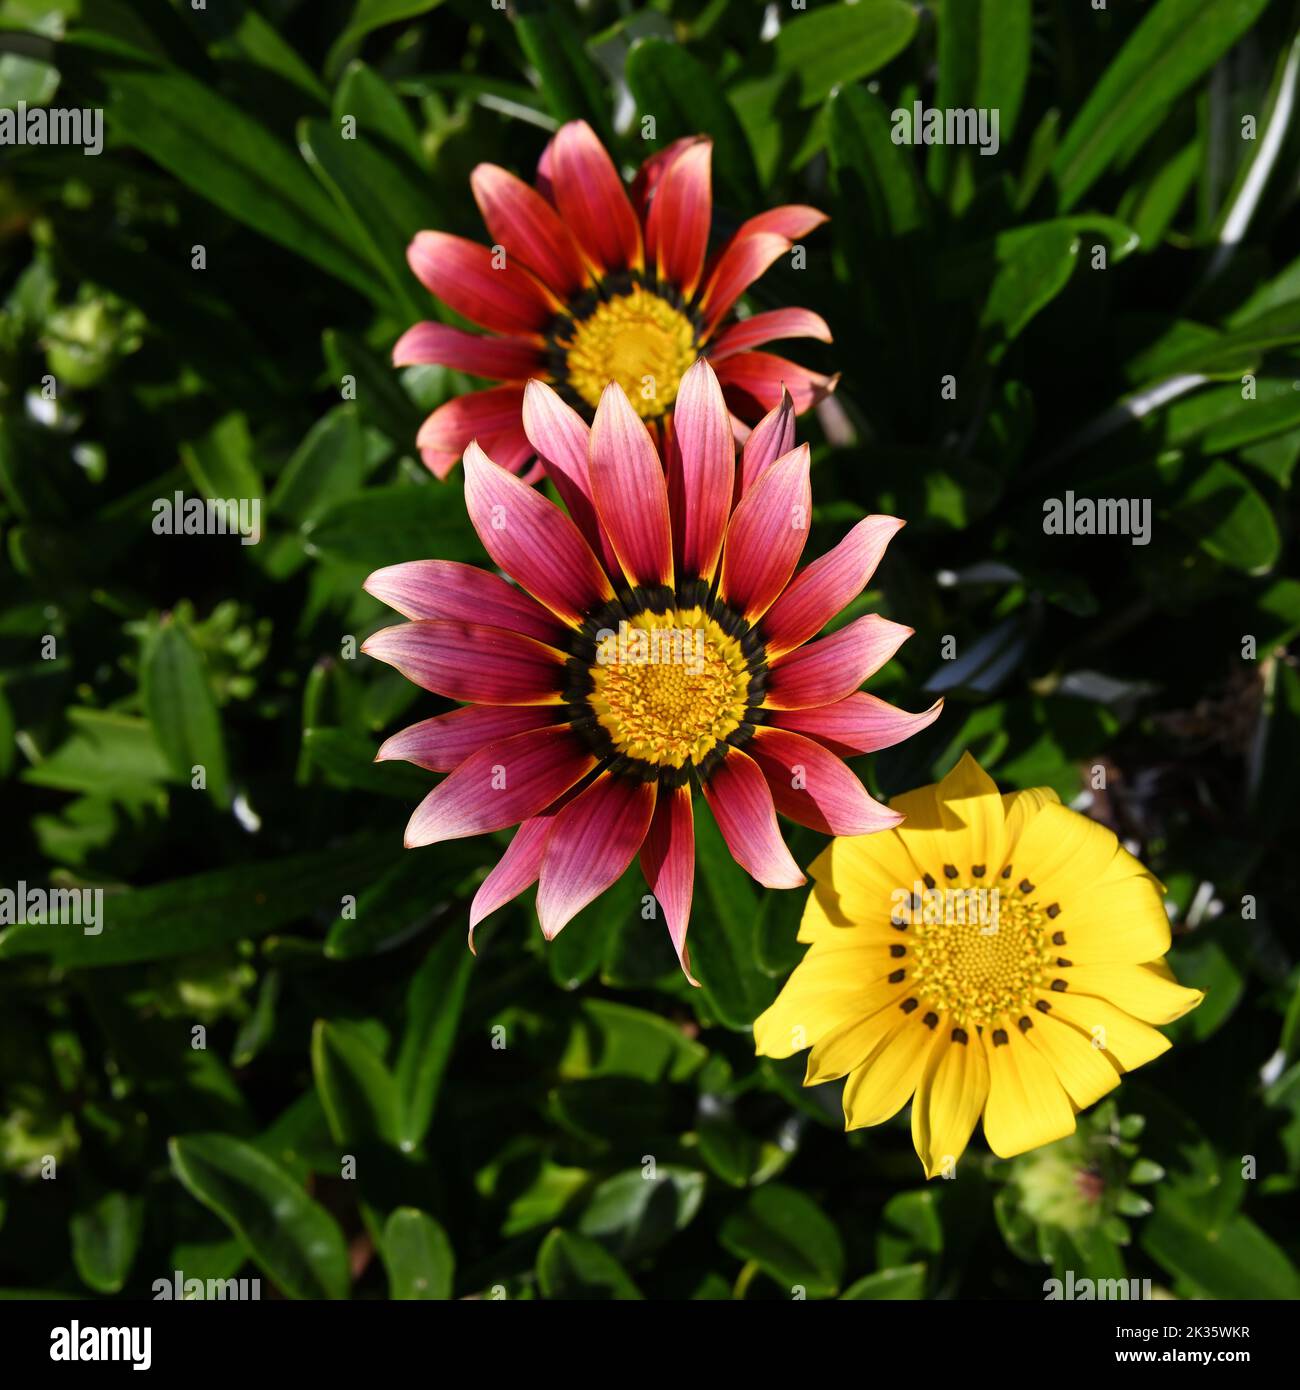 Top view of a deep pink or purple gazania rigens flower, above two other flowers of the same species and dark green leaves Stock Photo